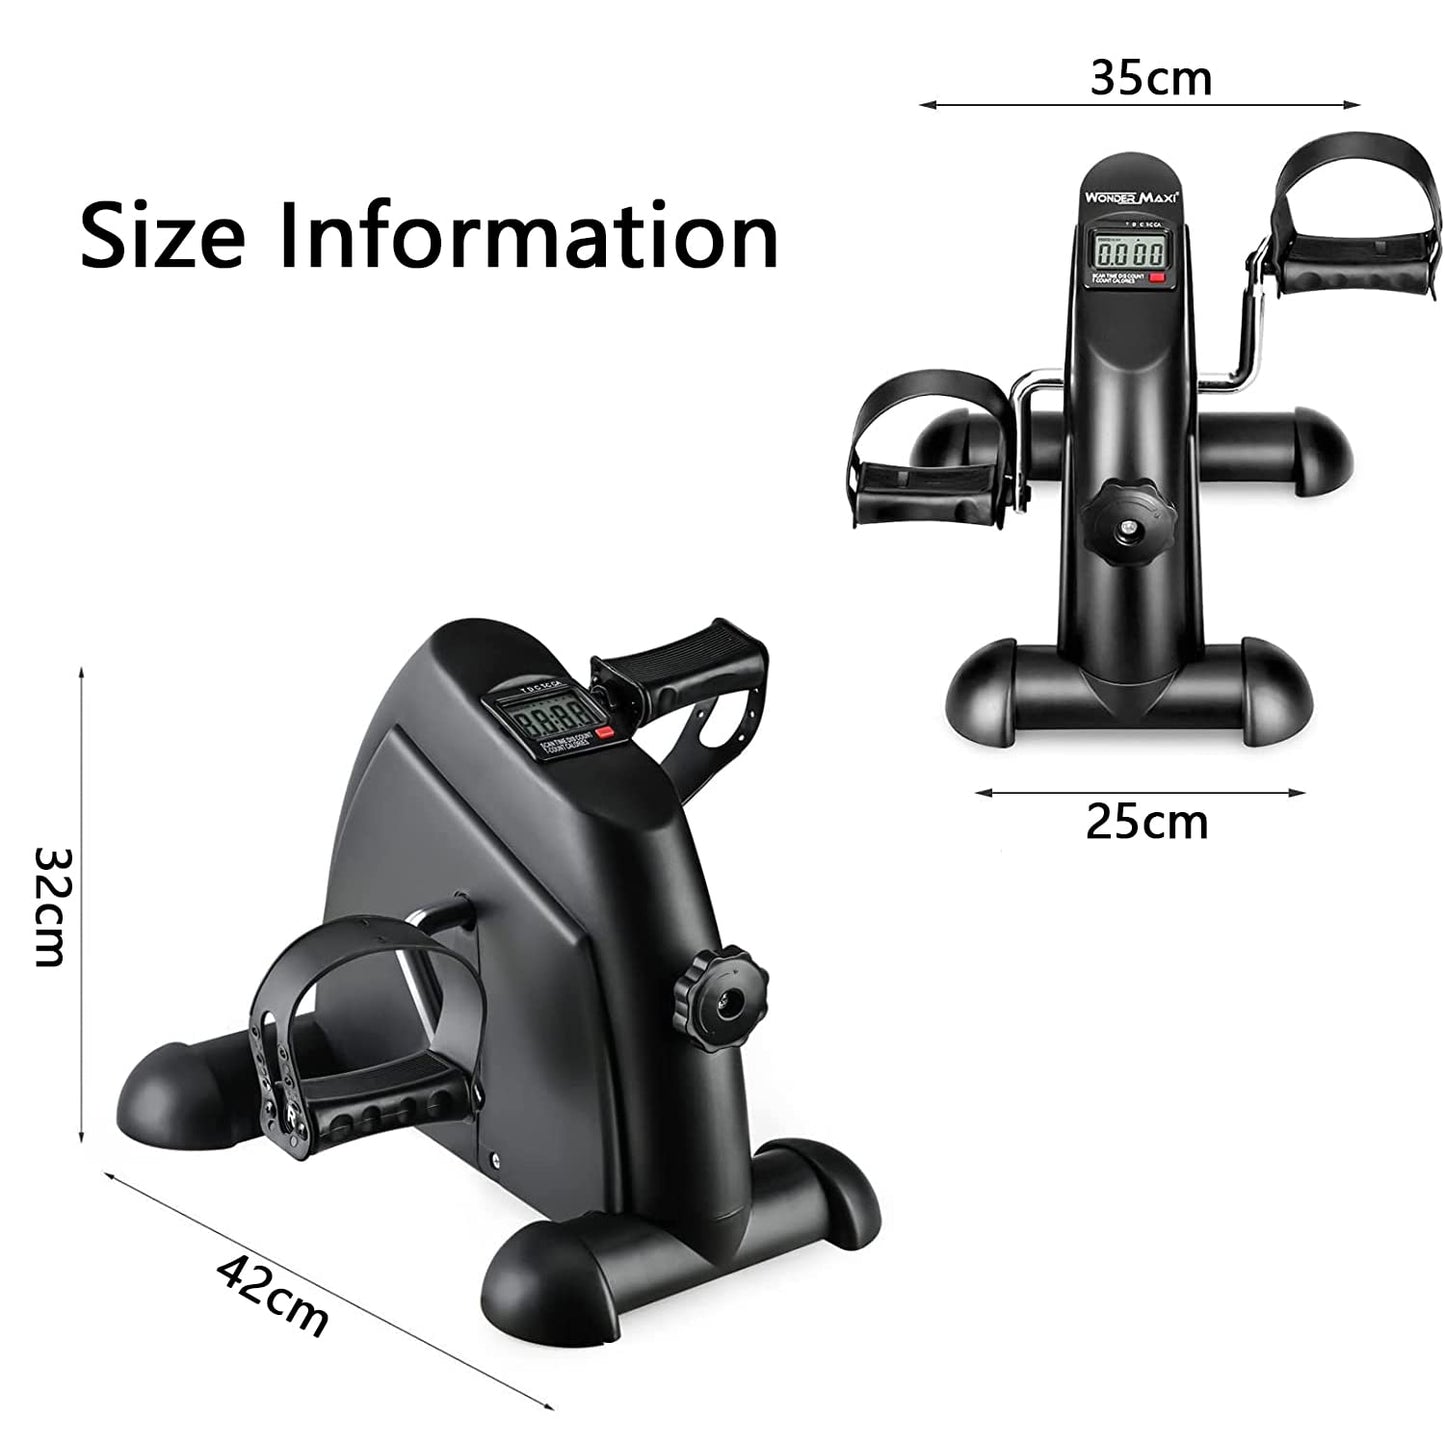 Arabest Mini Exercise Bike - Under Desk Bike Pedal Exerciser, Portable Exercise Stepper for Foot Cycle Arm Leg Workout, Pedal Exerciser for Seniors with Lcd Display